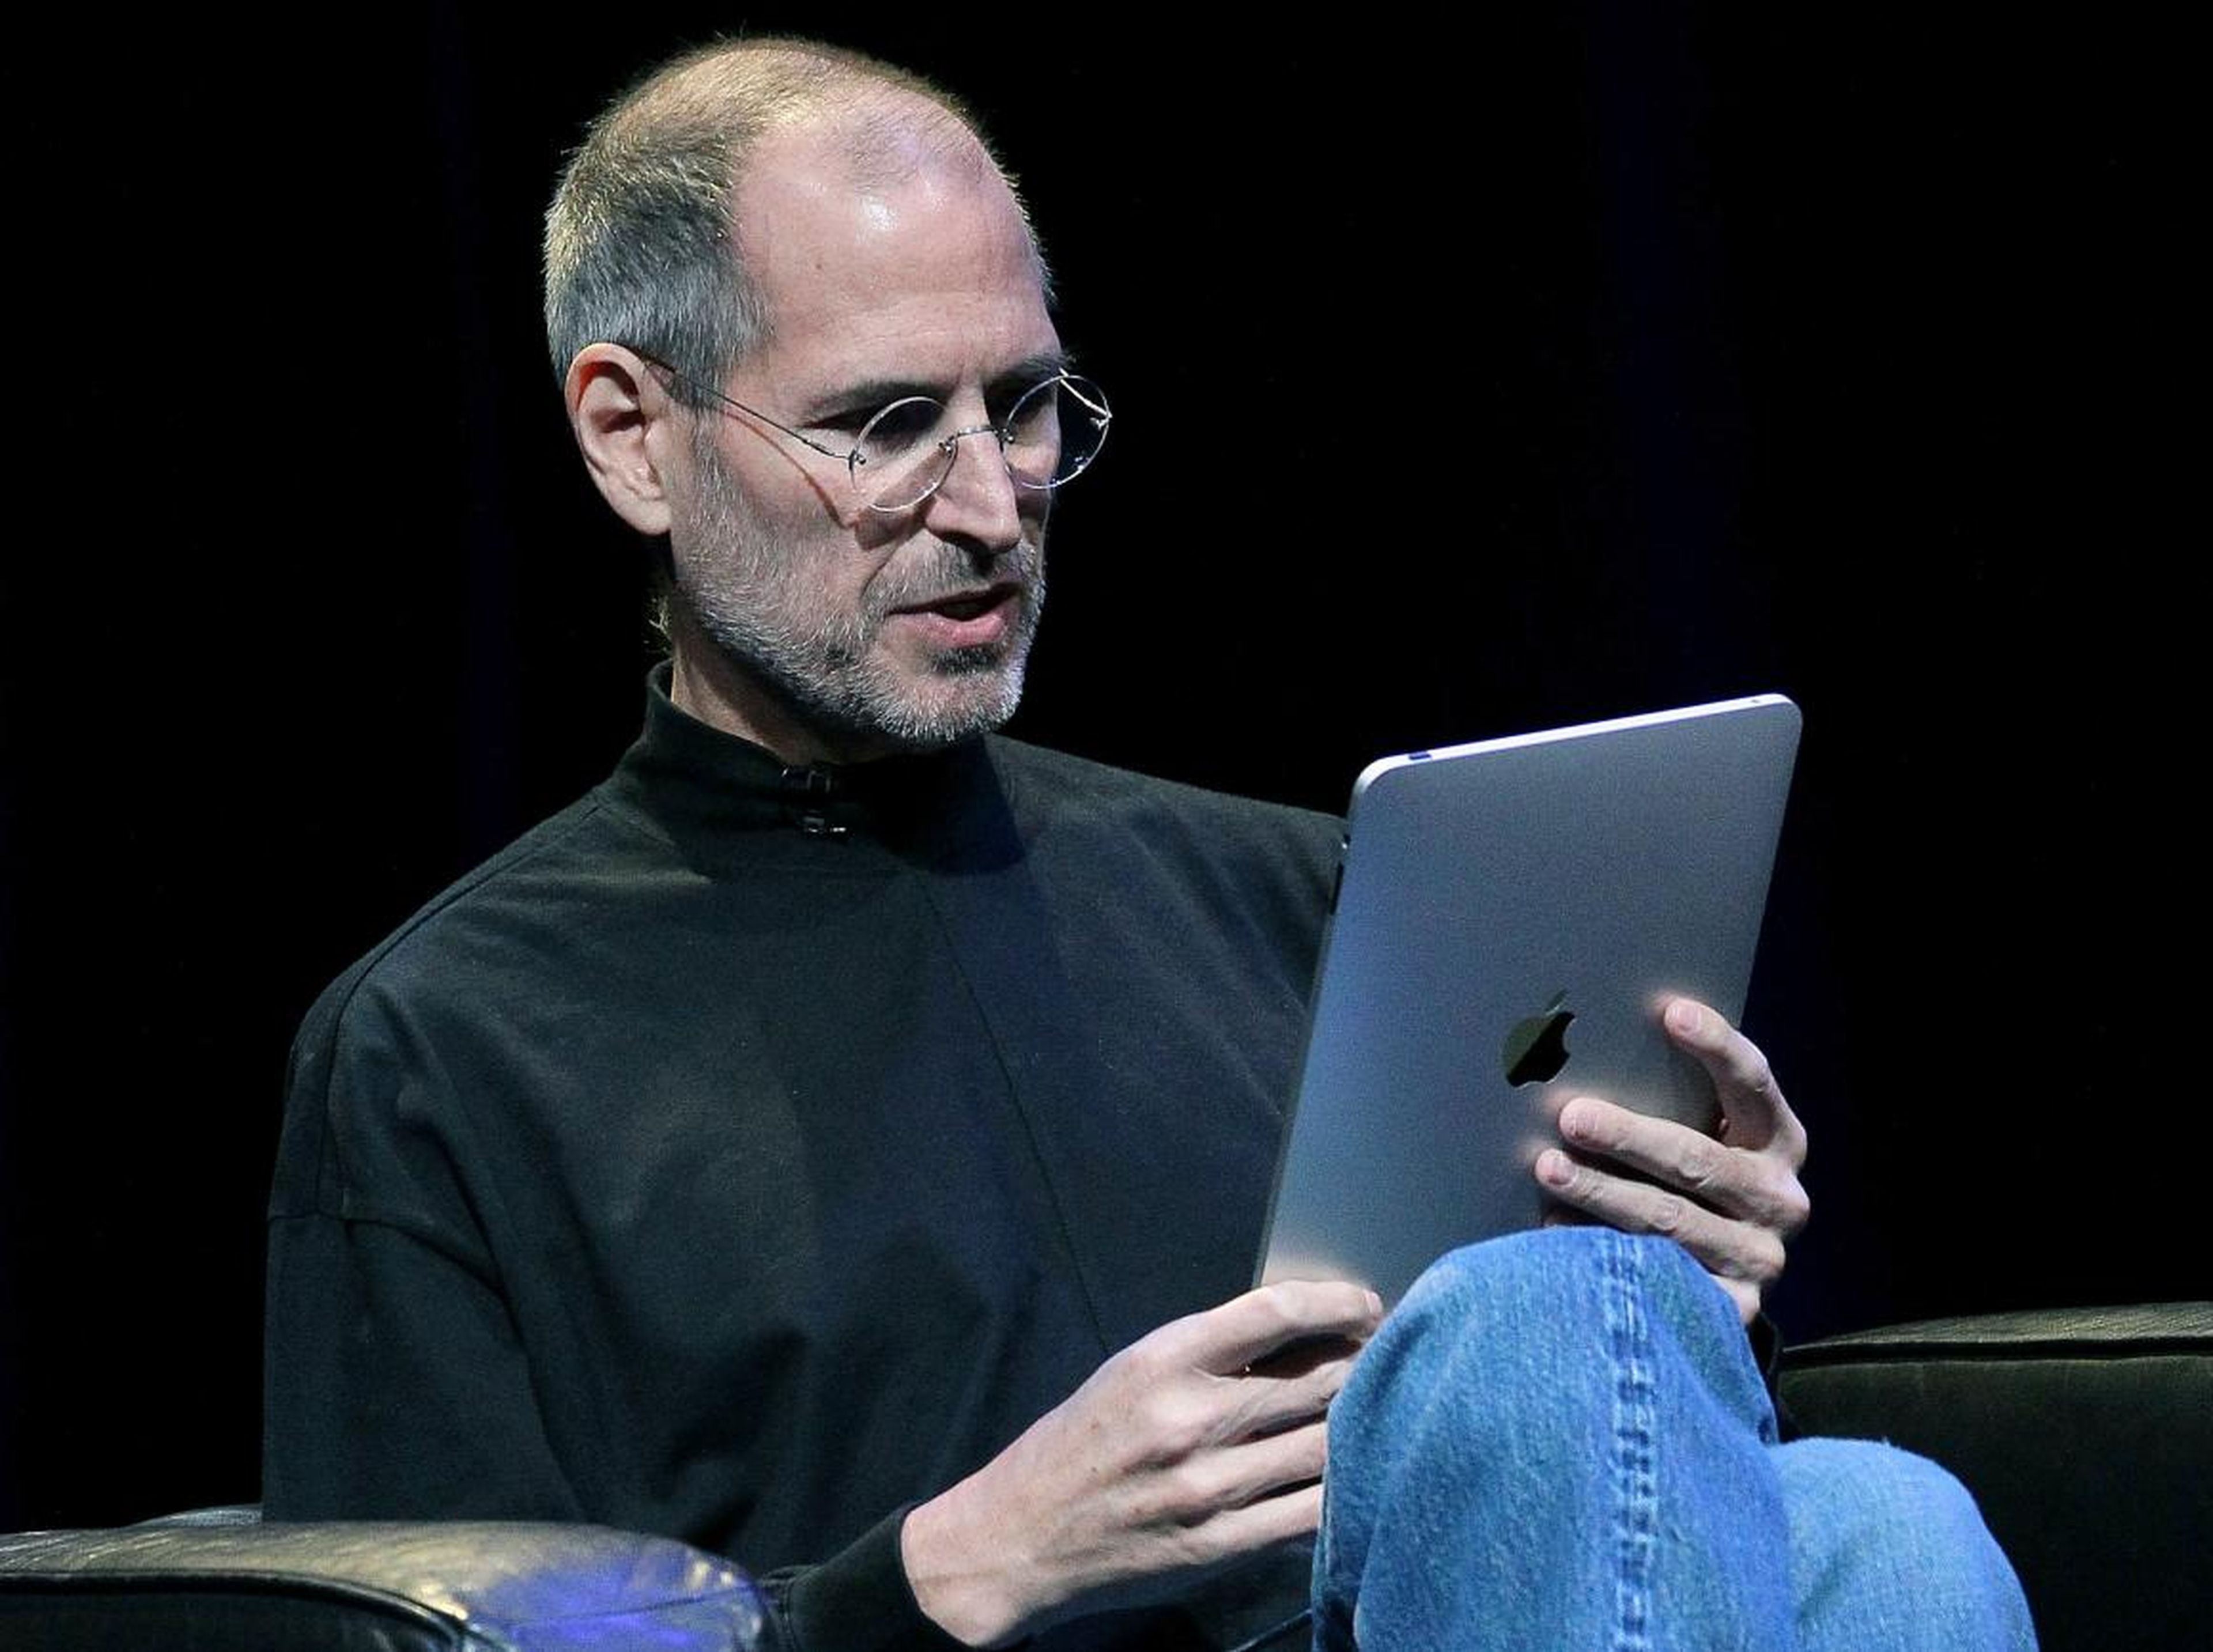 In 2010, Jobs finally introduced the Apple iPad, the tablet he had been wanting since the early 2000s.